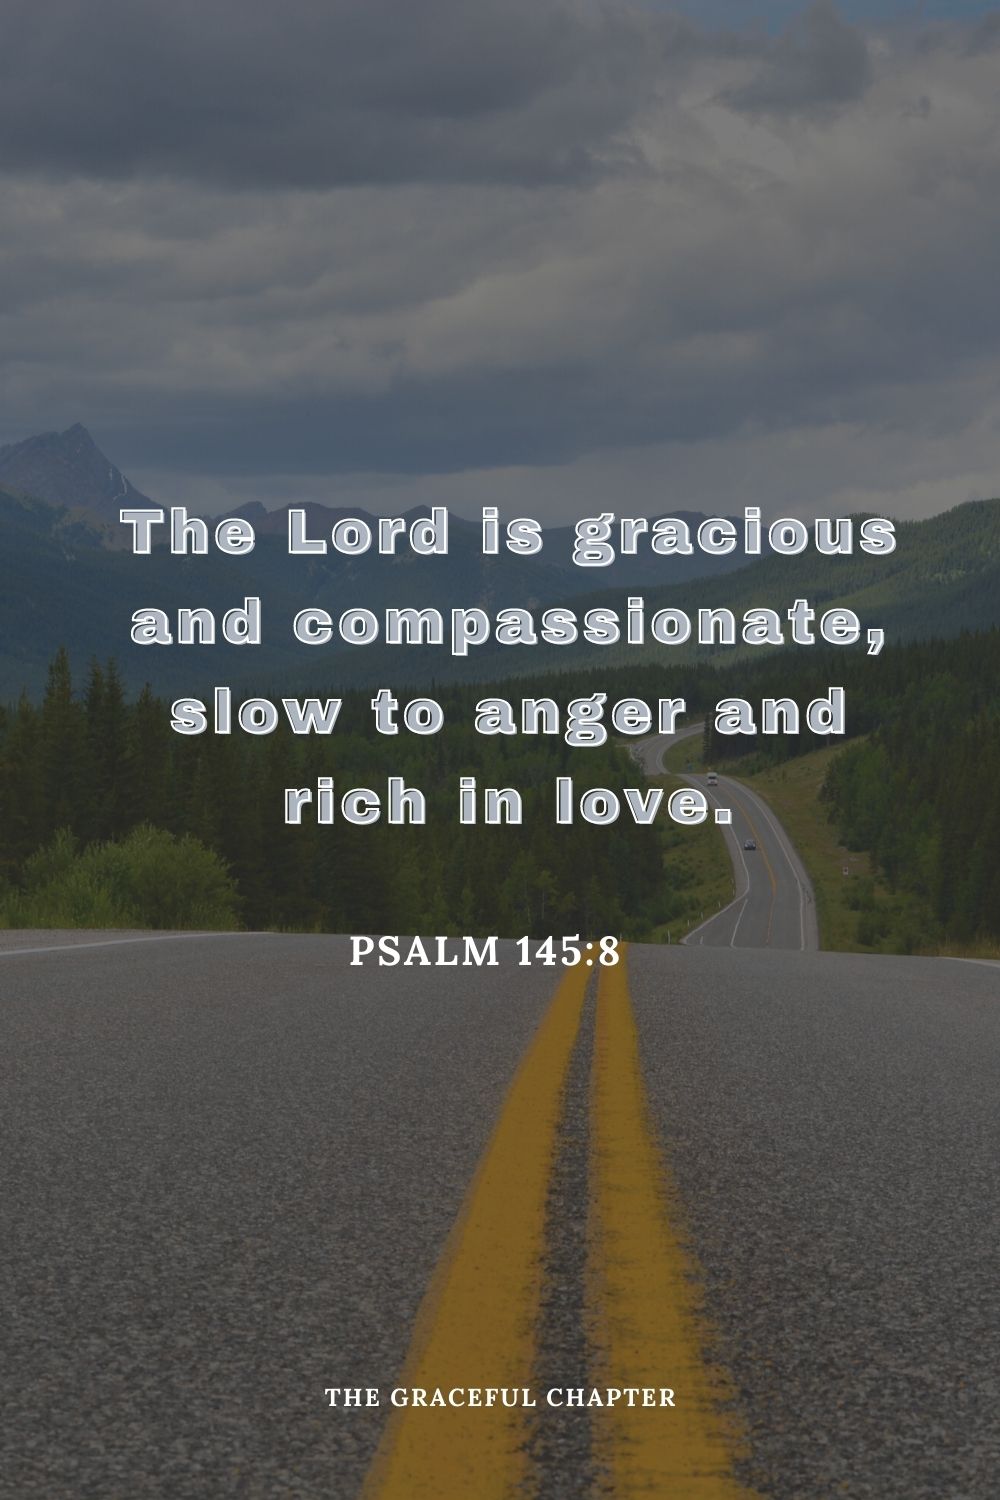 The Lord is gracious and compassionate, slow to anger and rich in love.